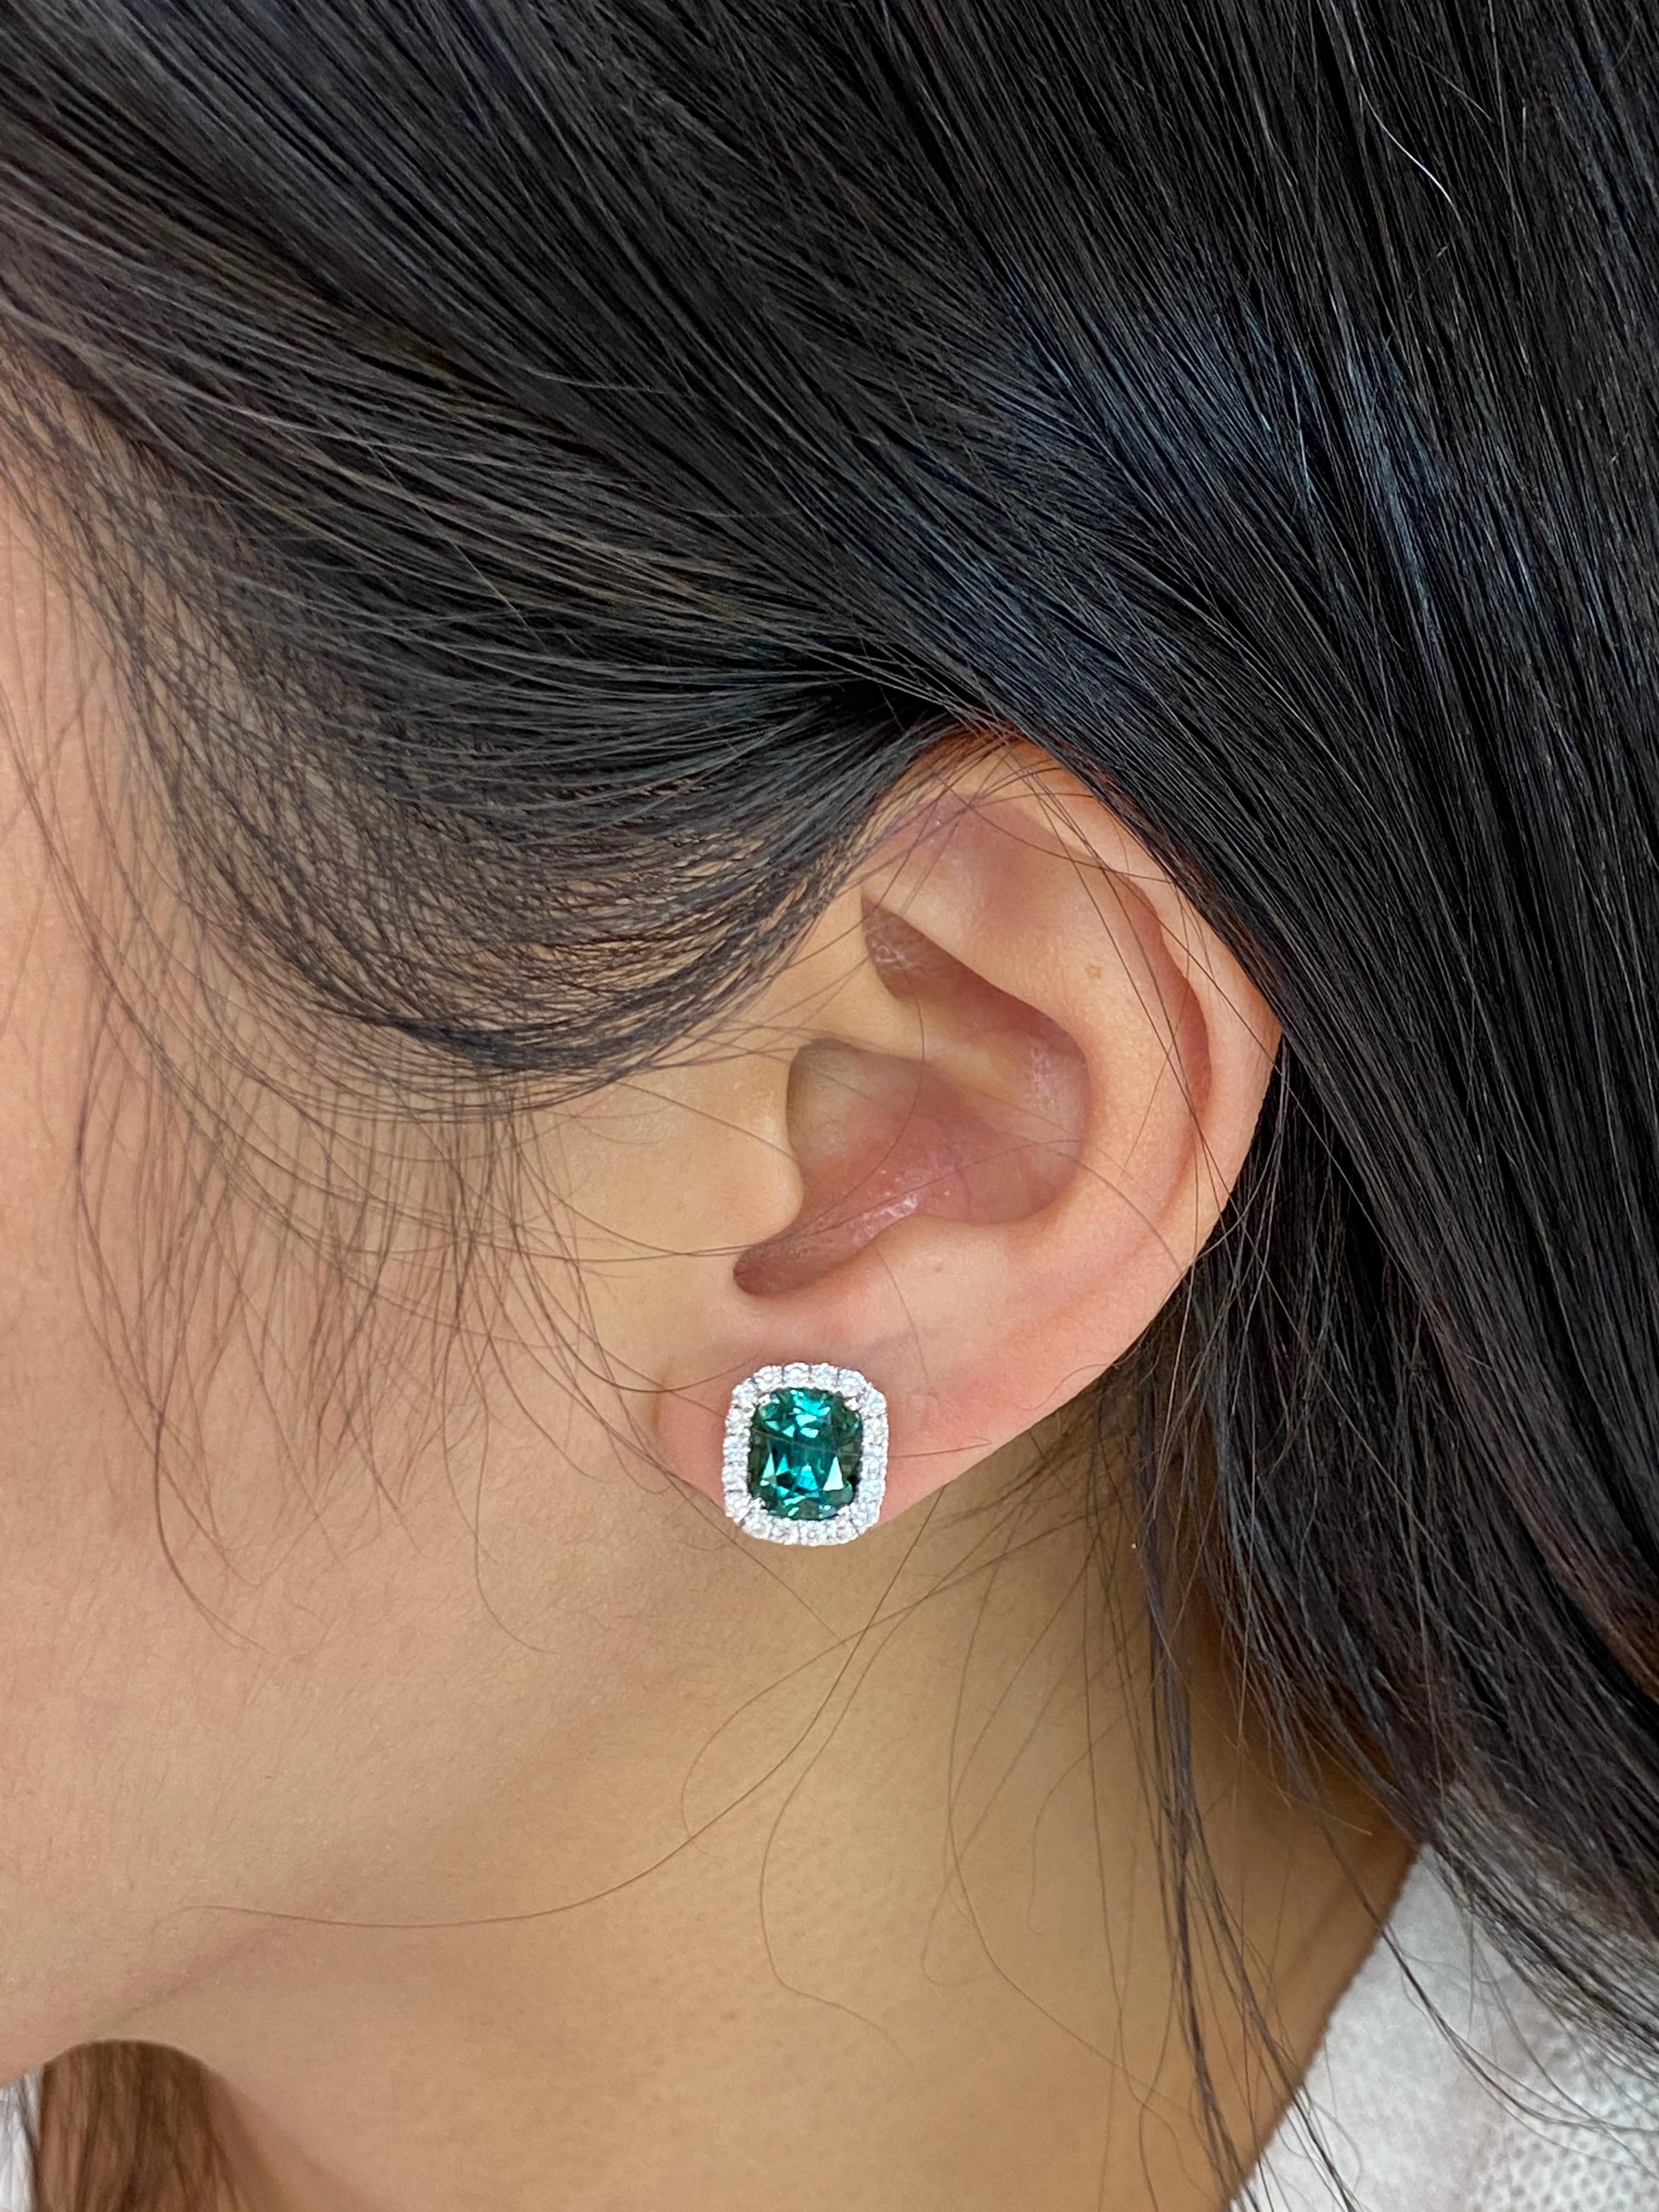 The color is unbelievable! Ask for a video. This is an eye catching piece! Here is a nice natural vivid green tourmaline and diamond earrings. The natural tourmaline is full of life. A color that is hard to find and hard to forget. It is not treated